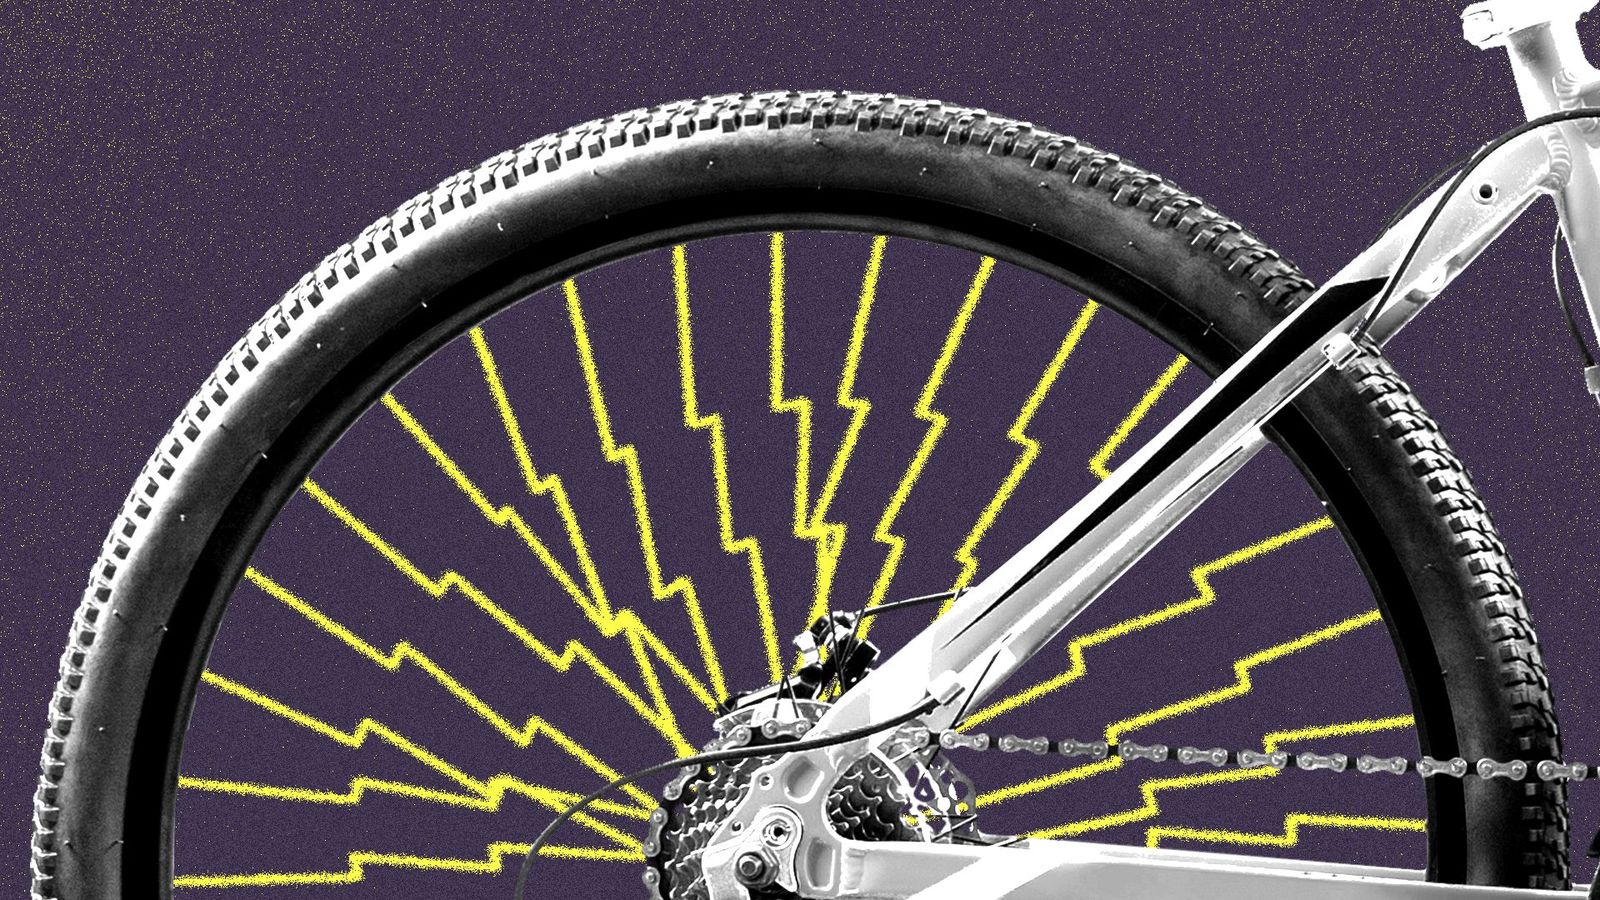 The best place to subsidize electric vehicles? Ebikes.